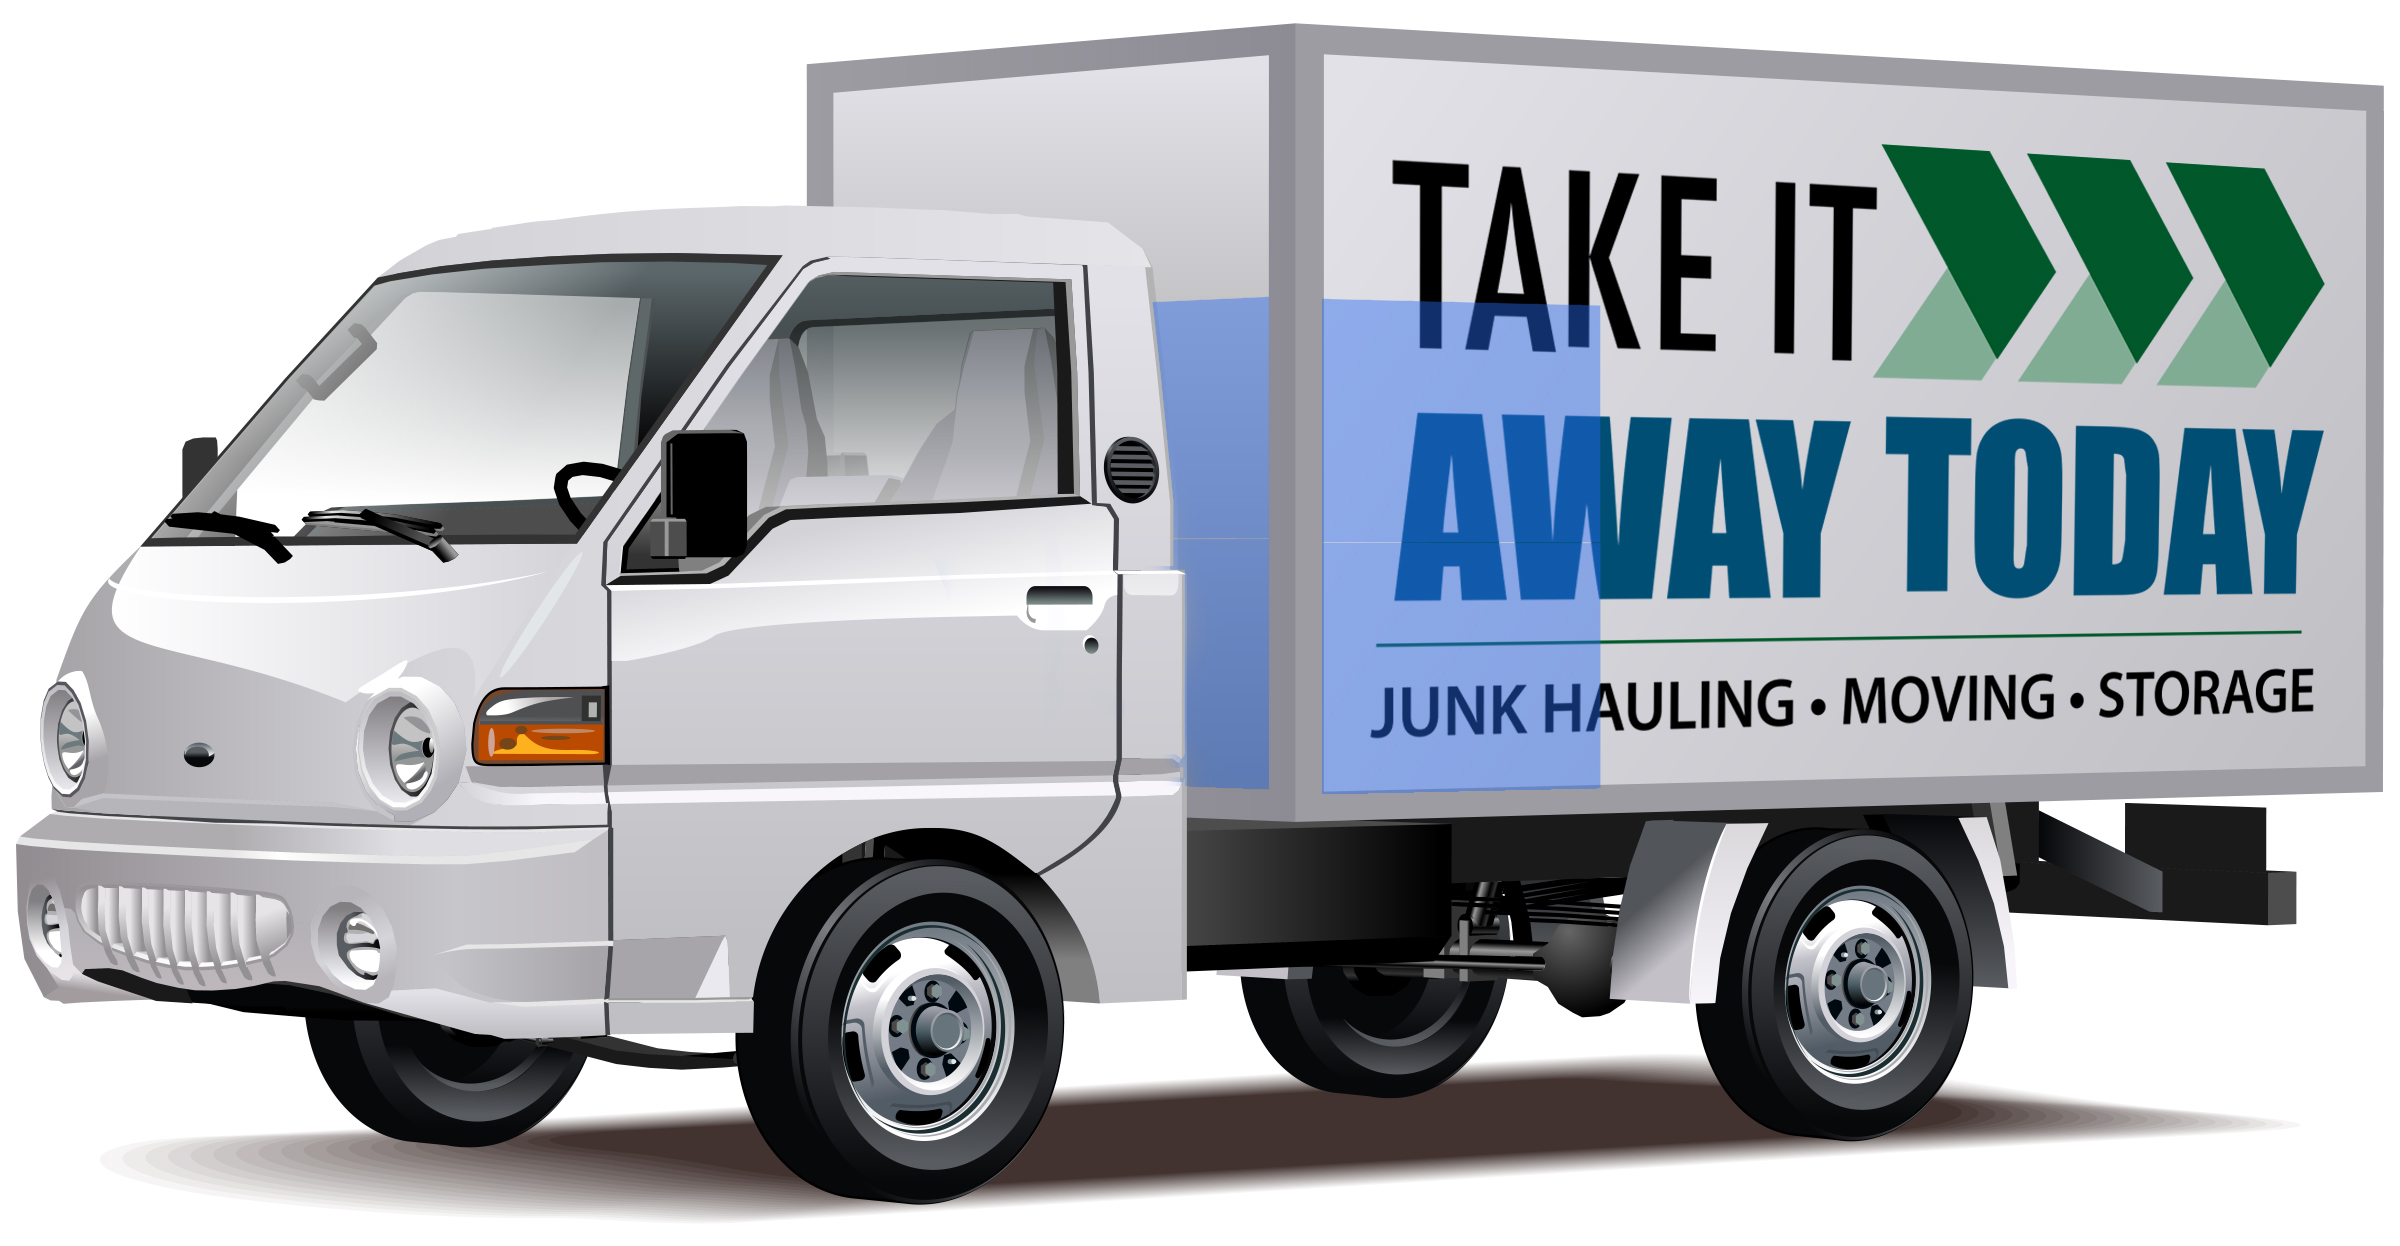 Junk Removal Truck New Jersey